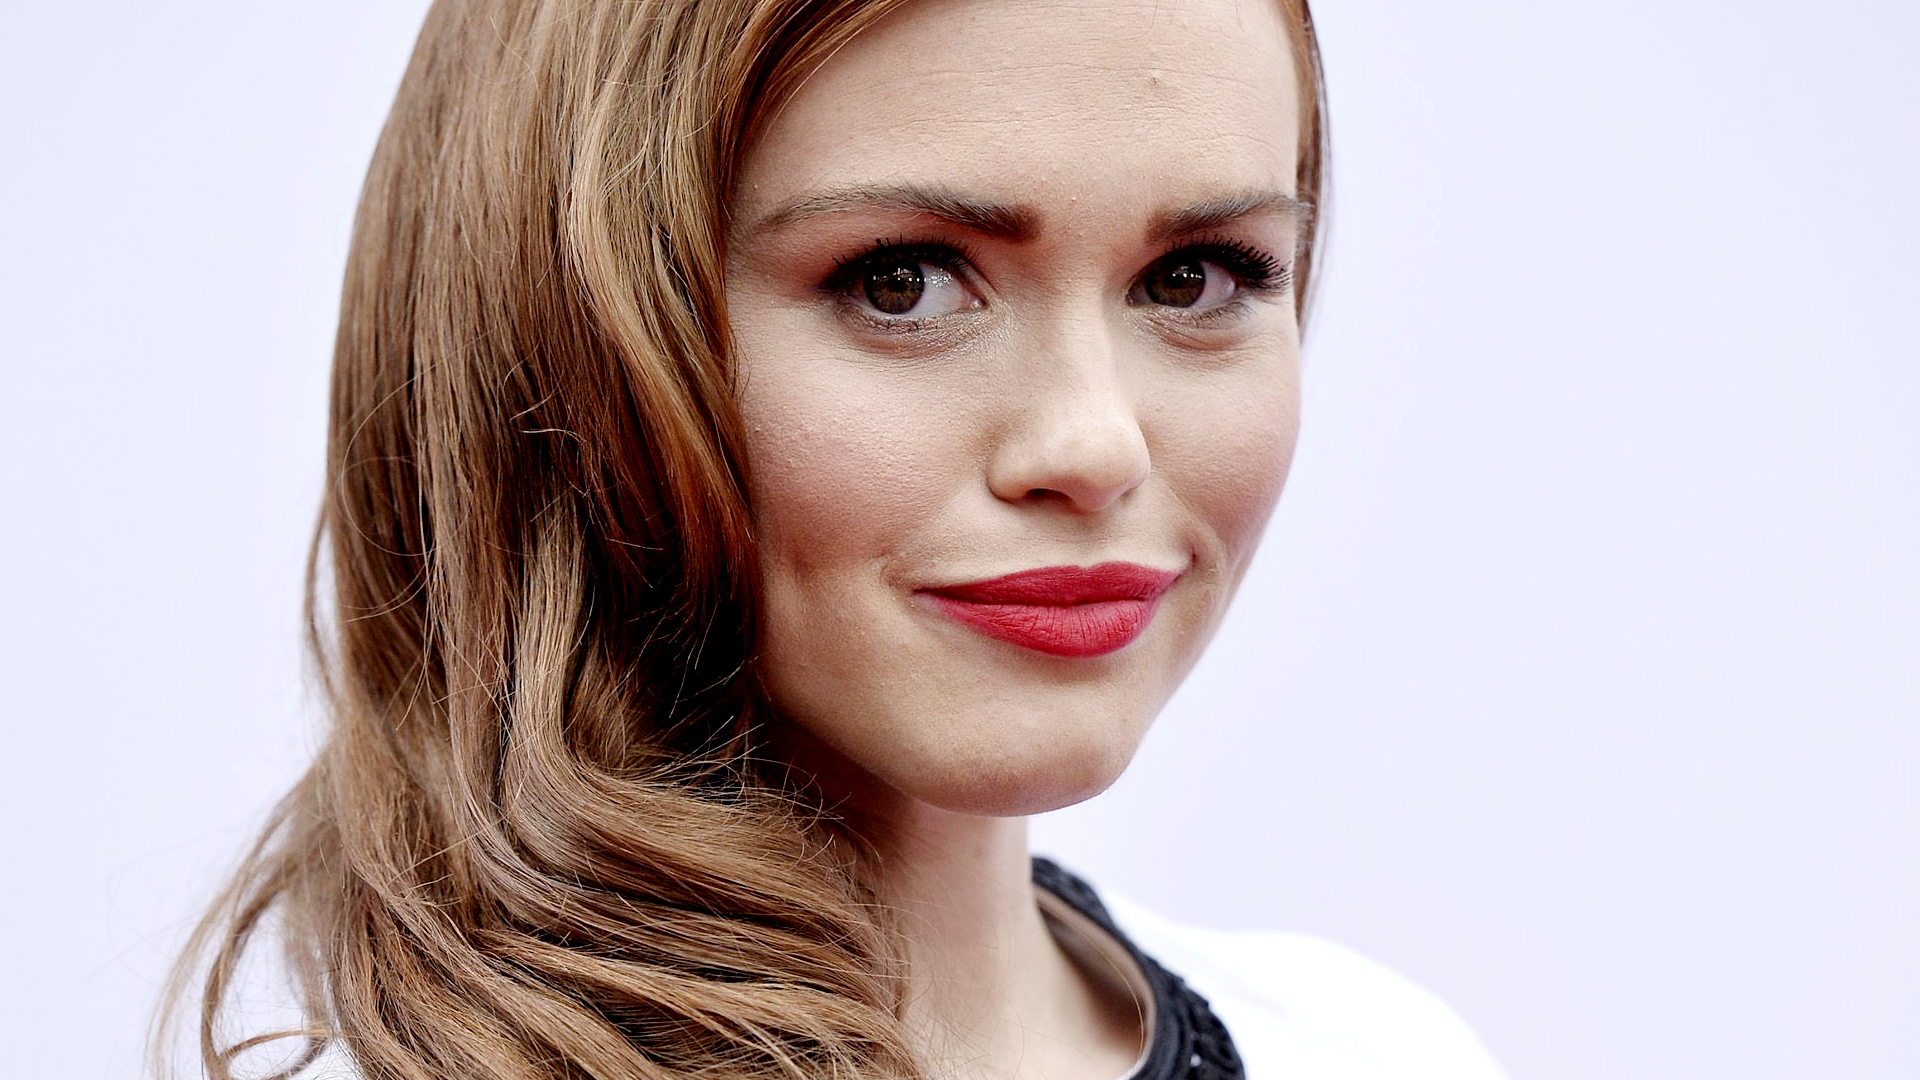 All Holland Roden wallpapers.